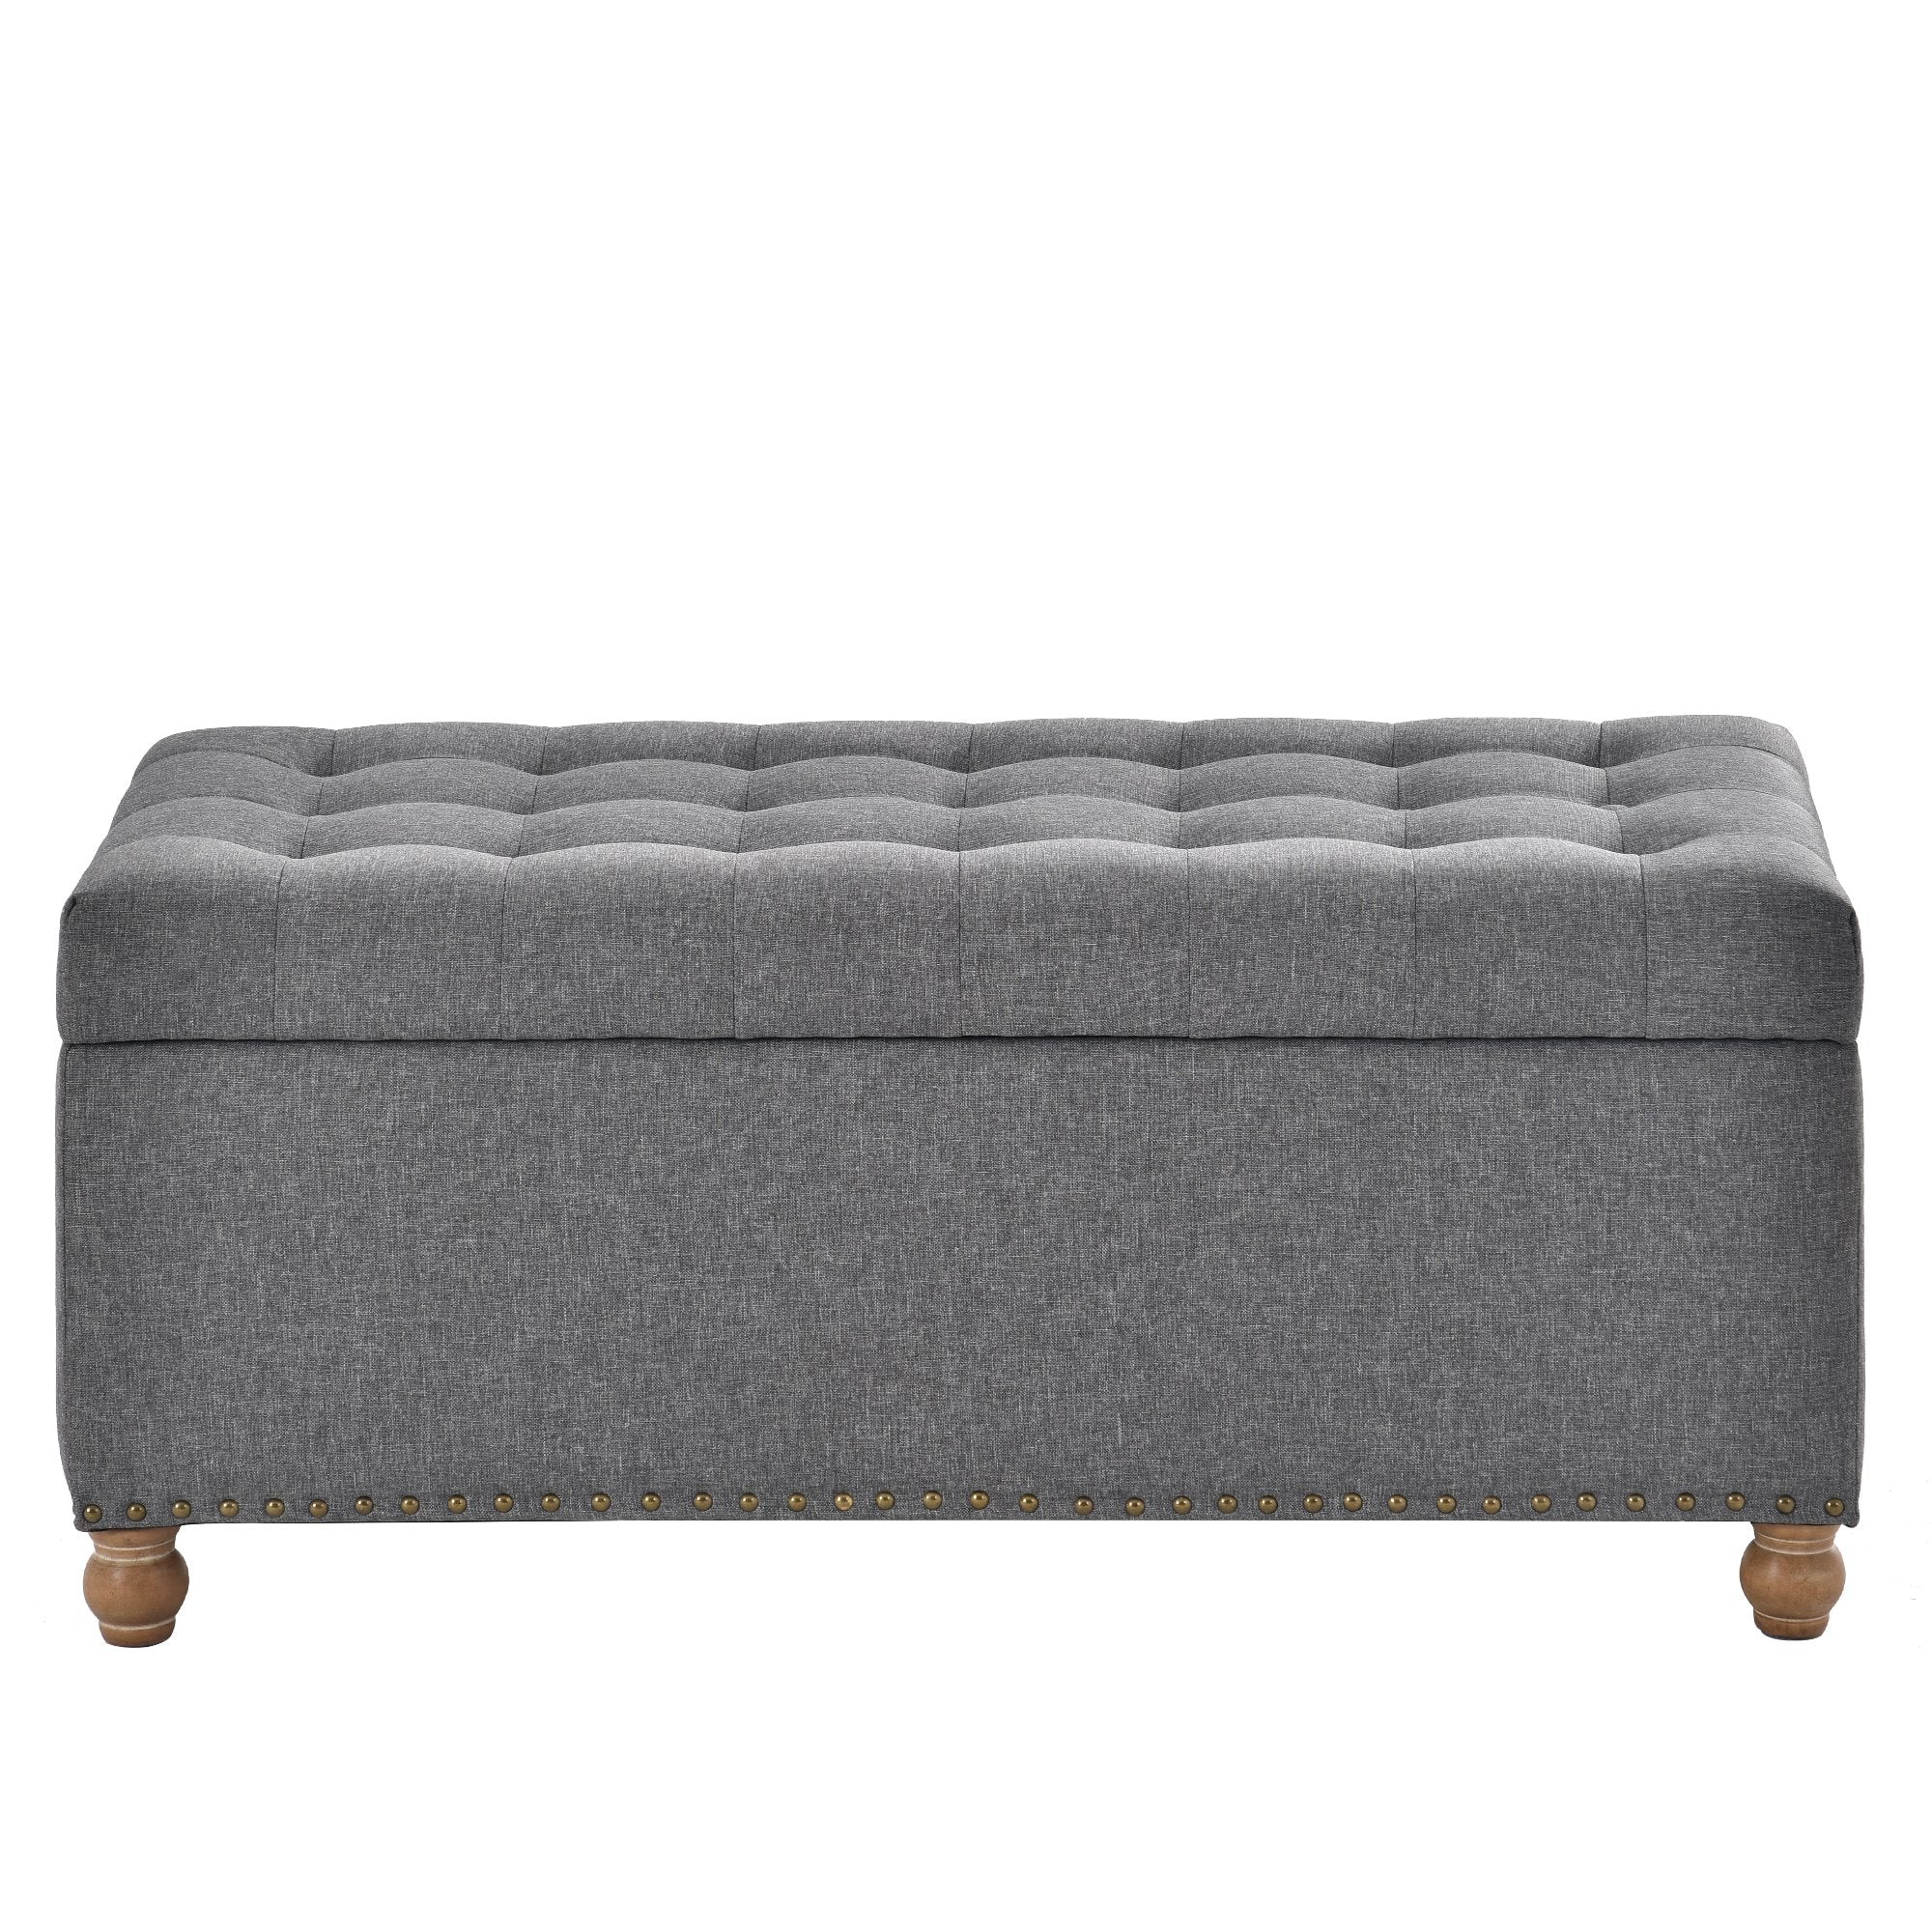 Upholstered Flip Top Storage Bench with Tufted Top, Rubber wood legs-Boyel Living